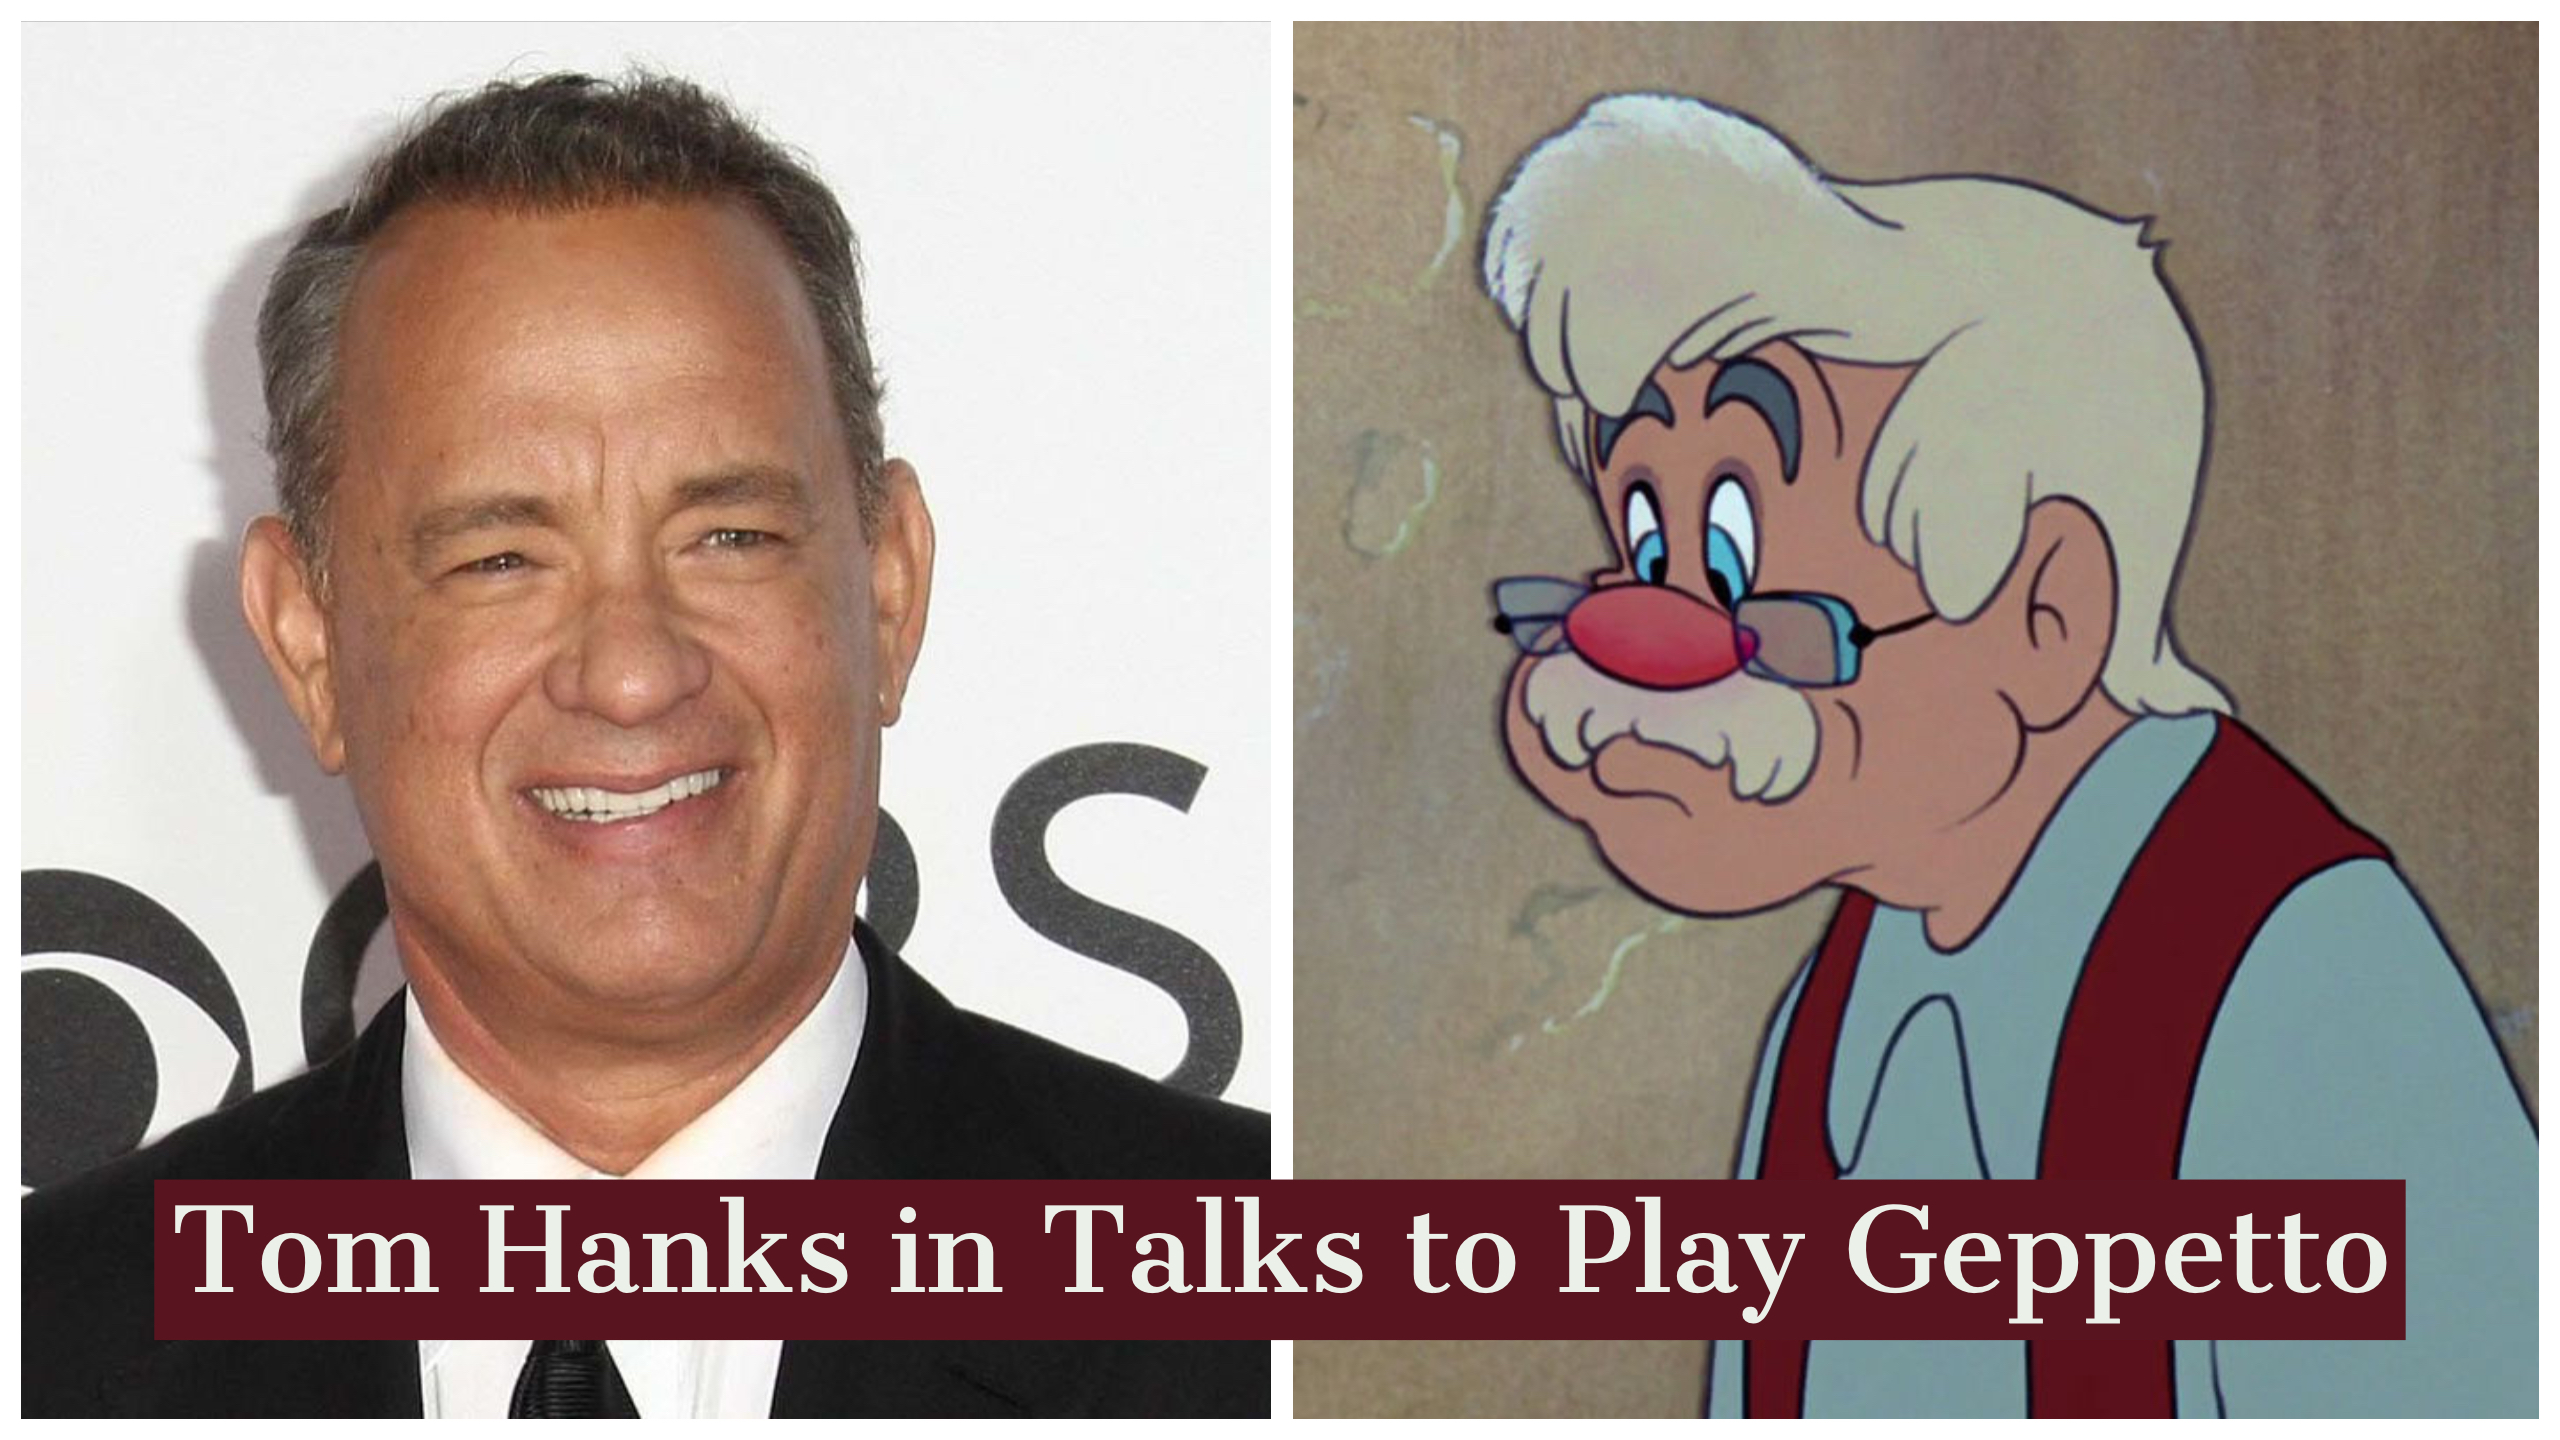 Tom Hanks Eyeing Role in Upcoming Pinocchio Movie